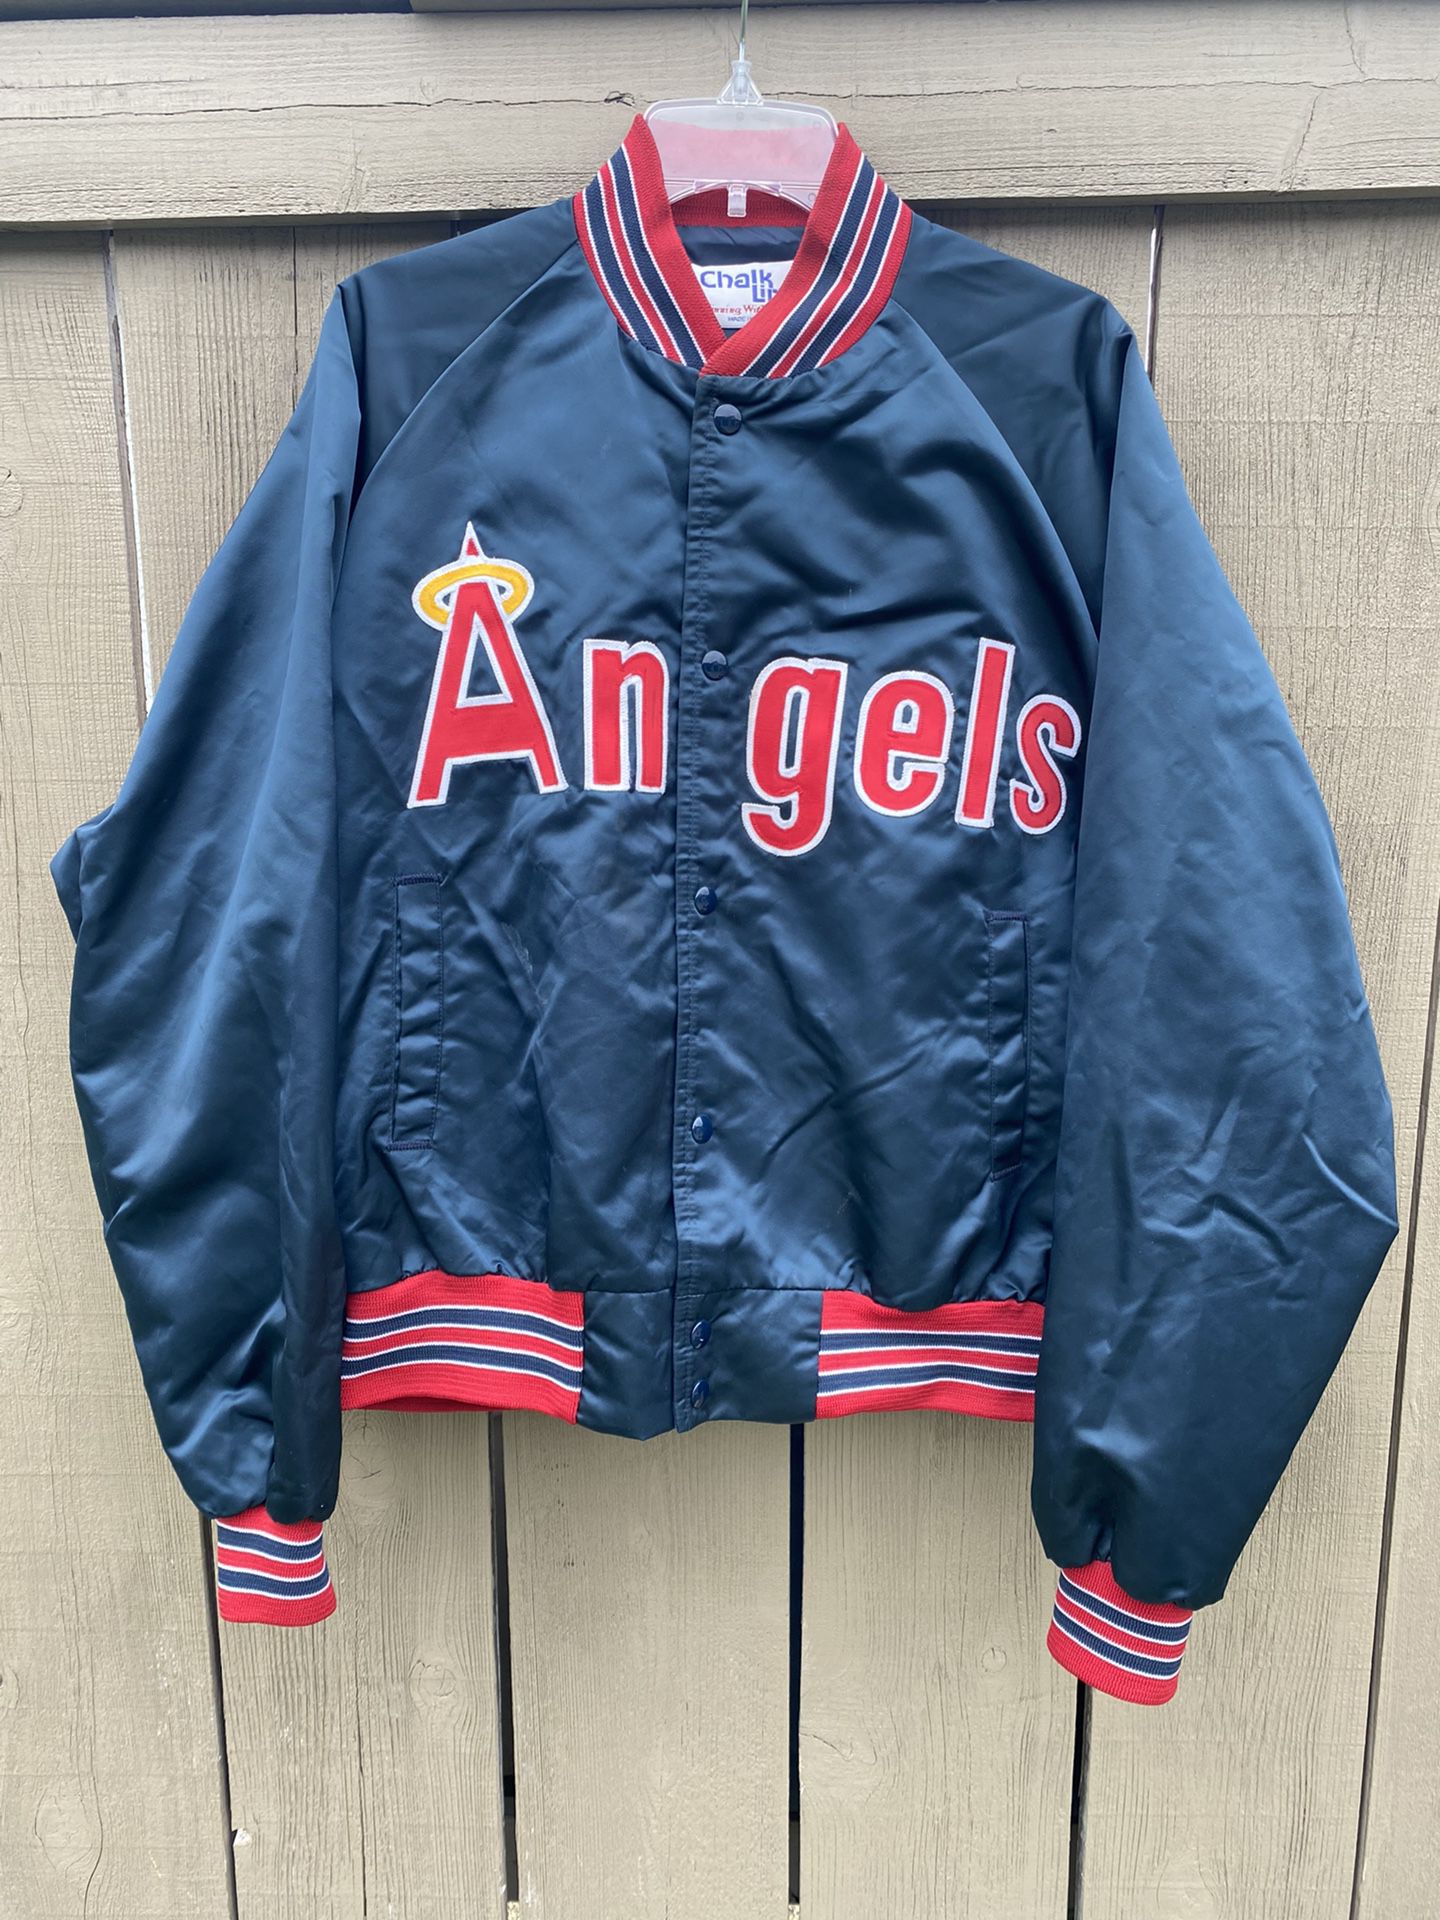 Vintage Rare 1980s California Angels Chalkline Satin Jacket MLB MADE in USA  XL for Sale in La Mesa, CA - OfferUp